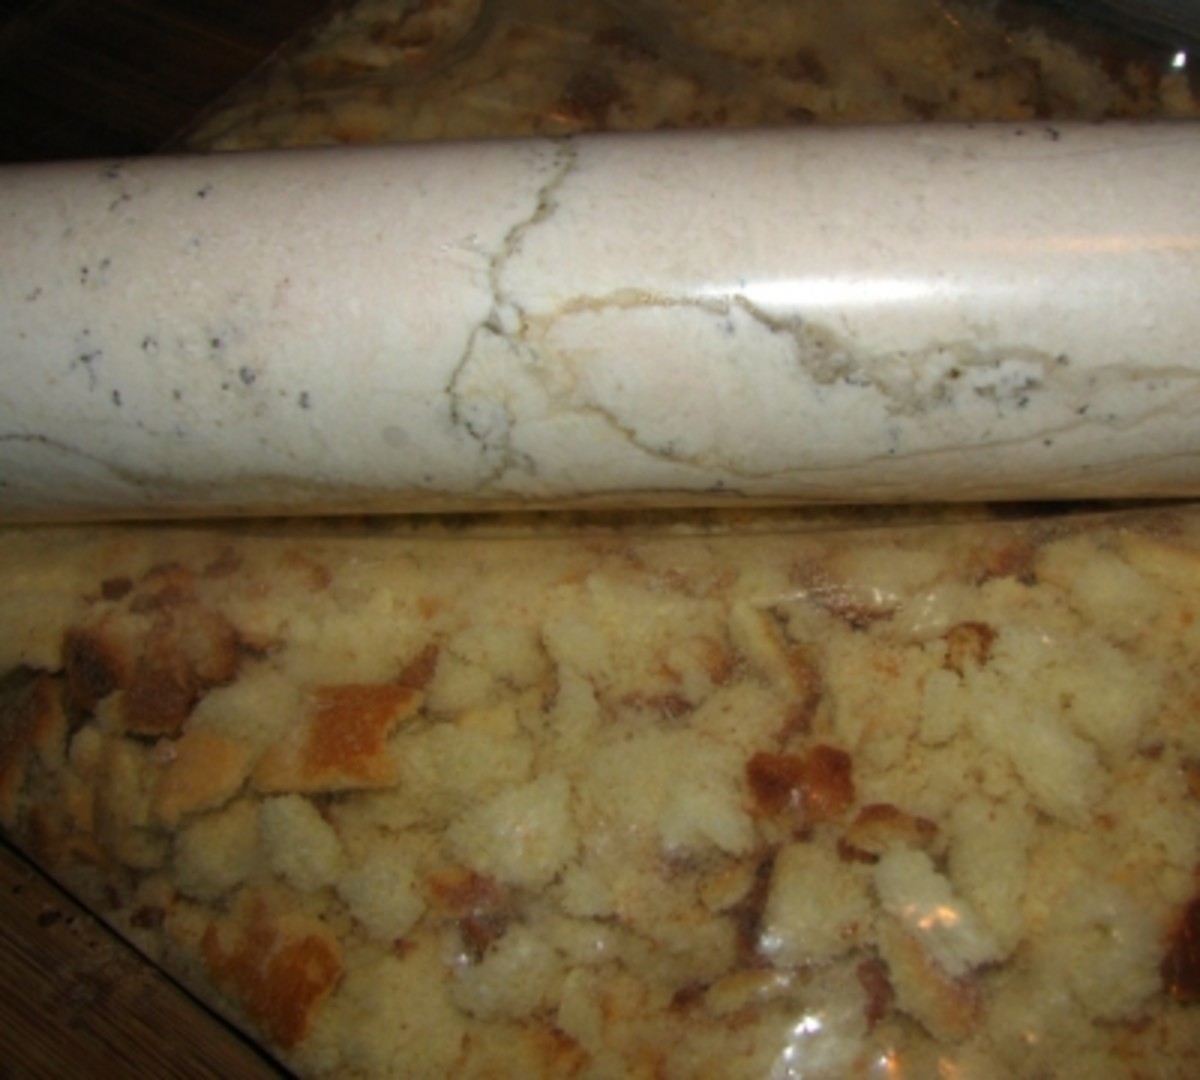 A marble rolling pin makes disassembling bread crumbs a lot of fun!